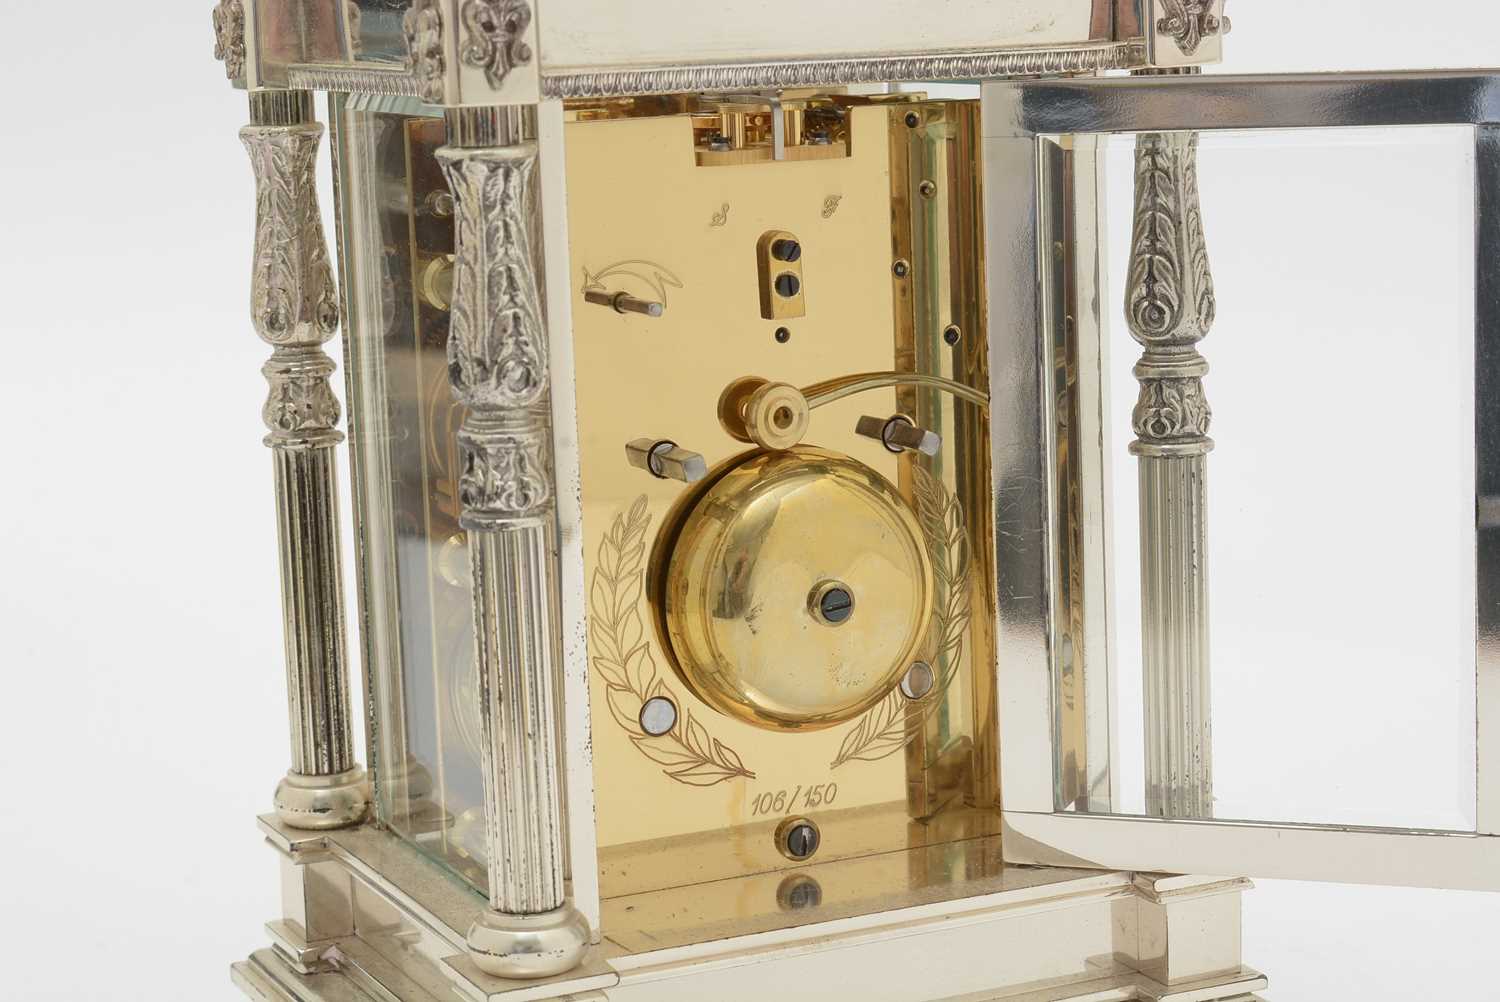 'The Canopy Clock': a large silver carriage clock, by Garrard, - Image 6 of 16